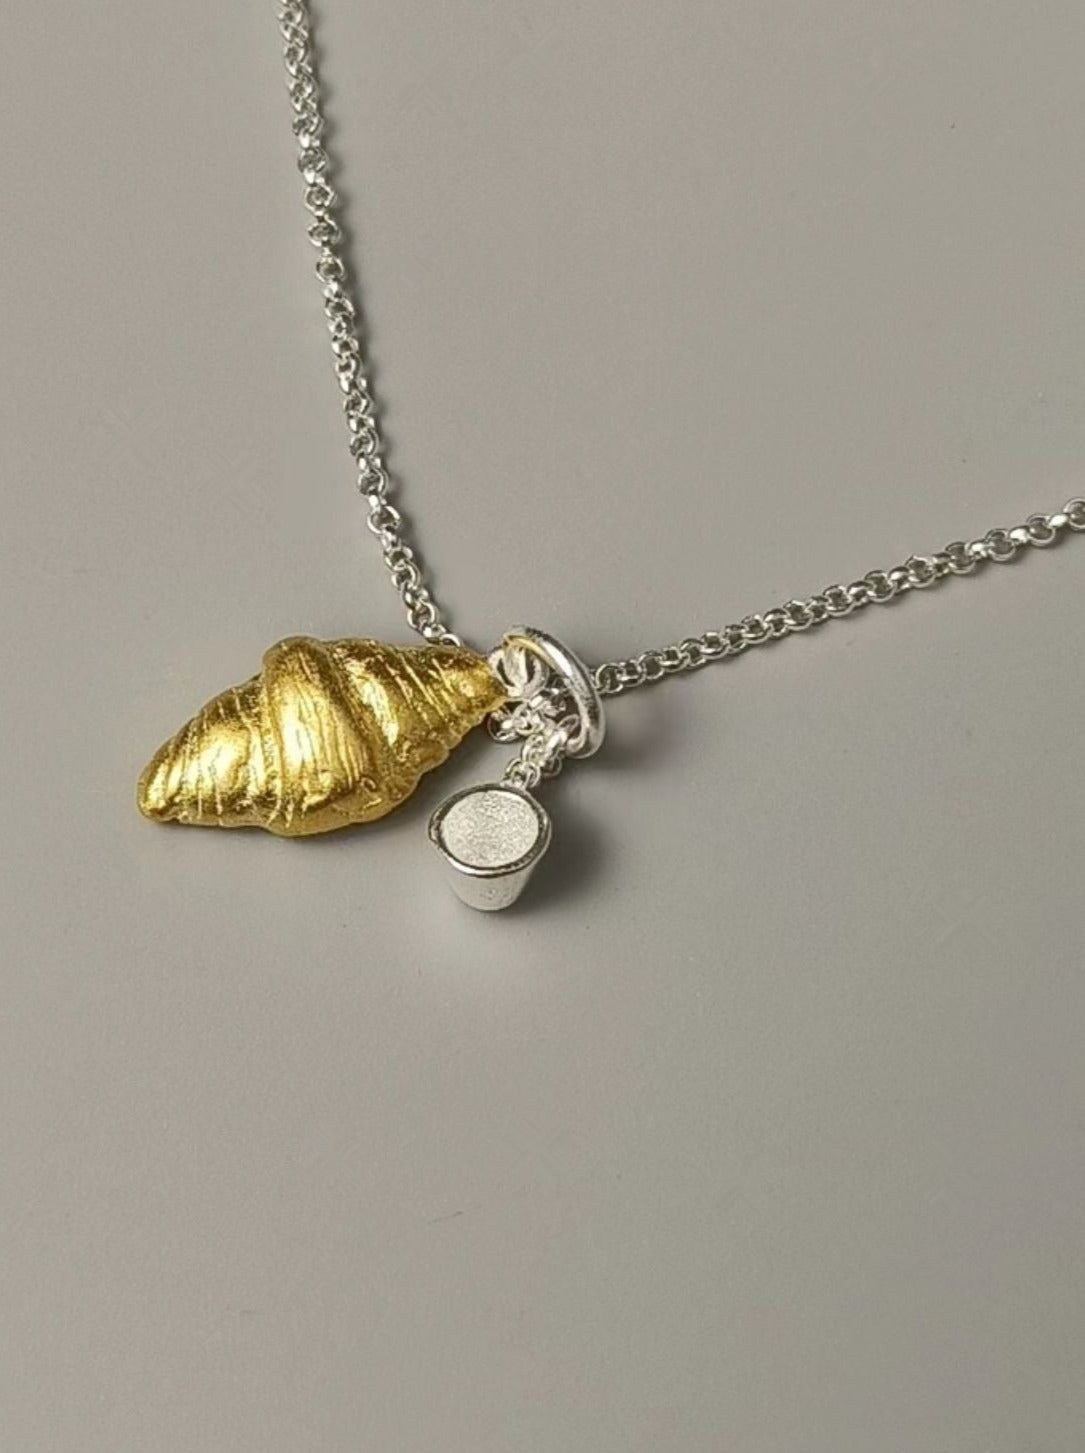 Morning croissant S925 necklace B1865